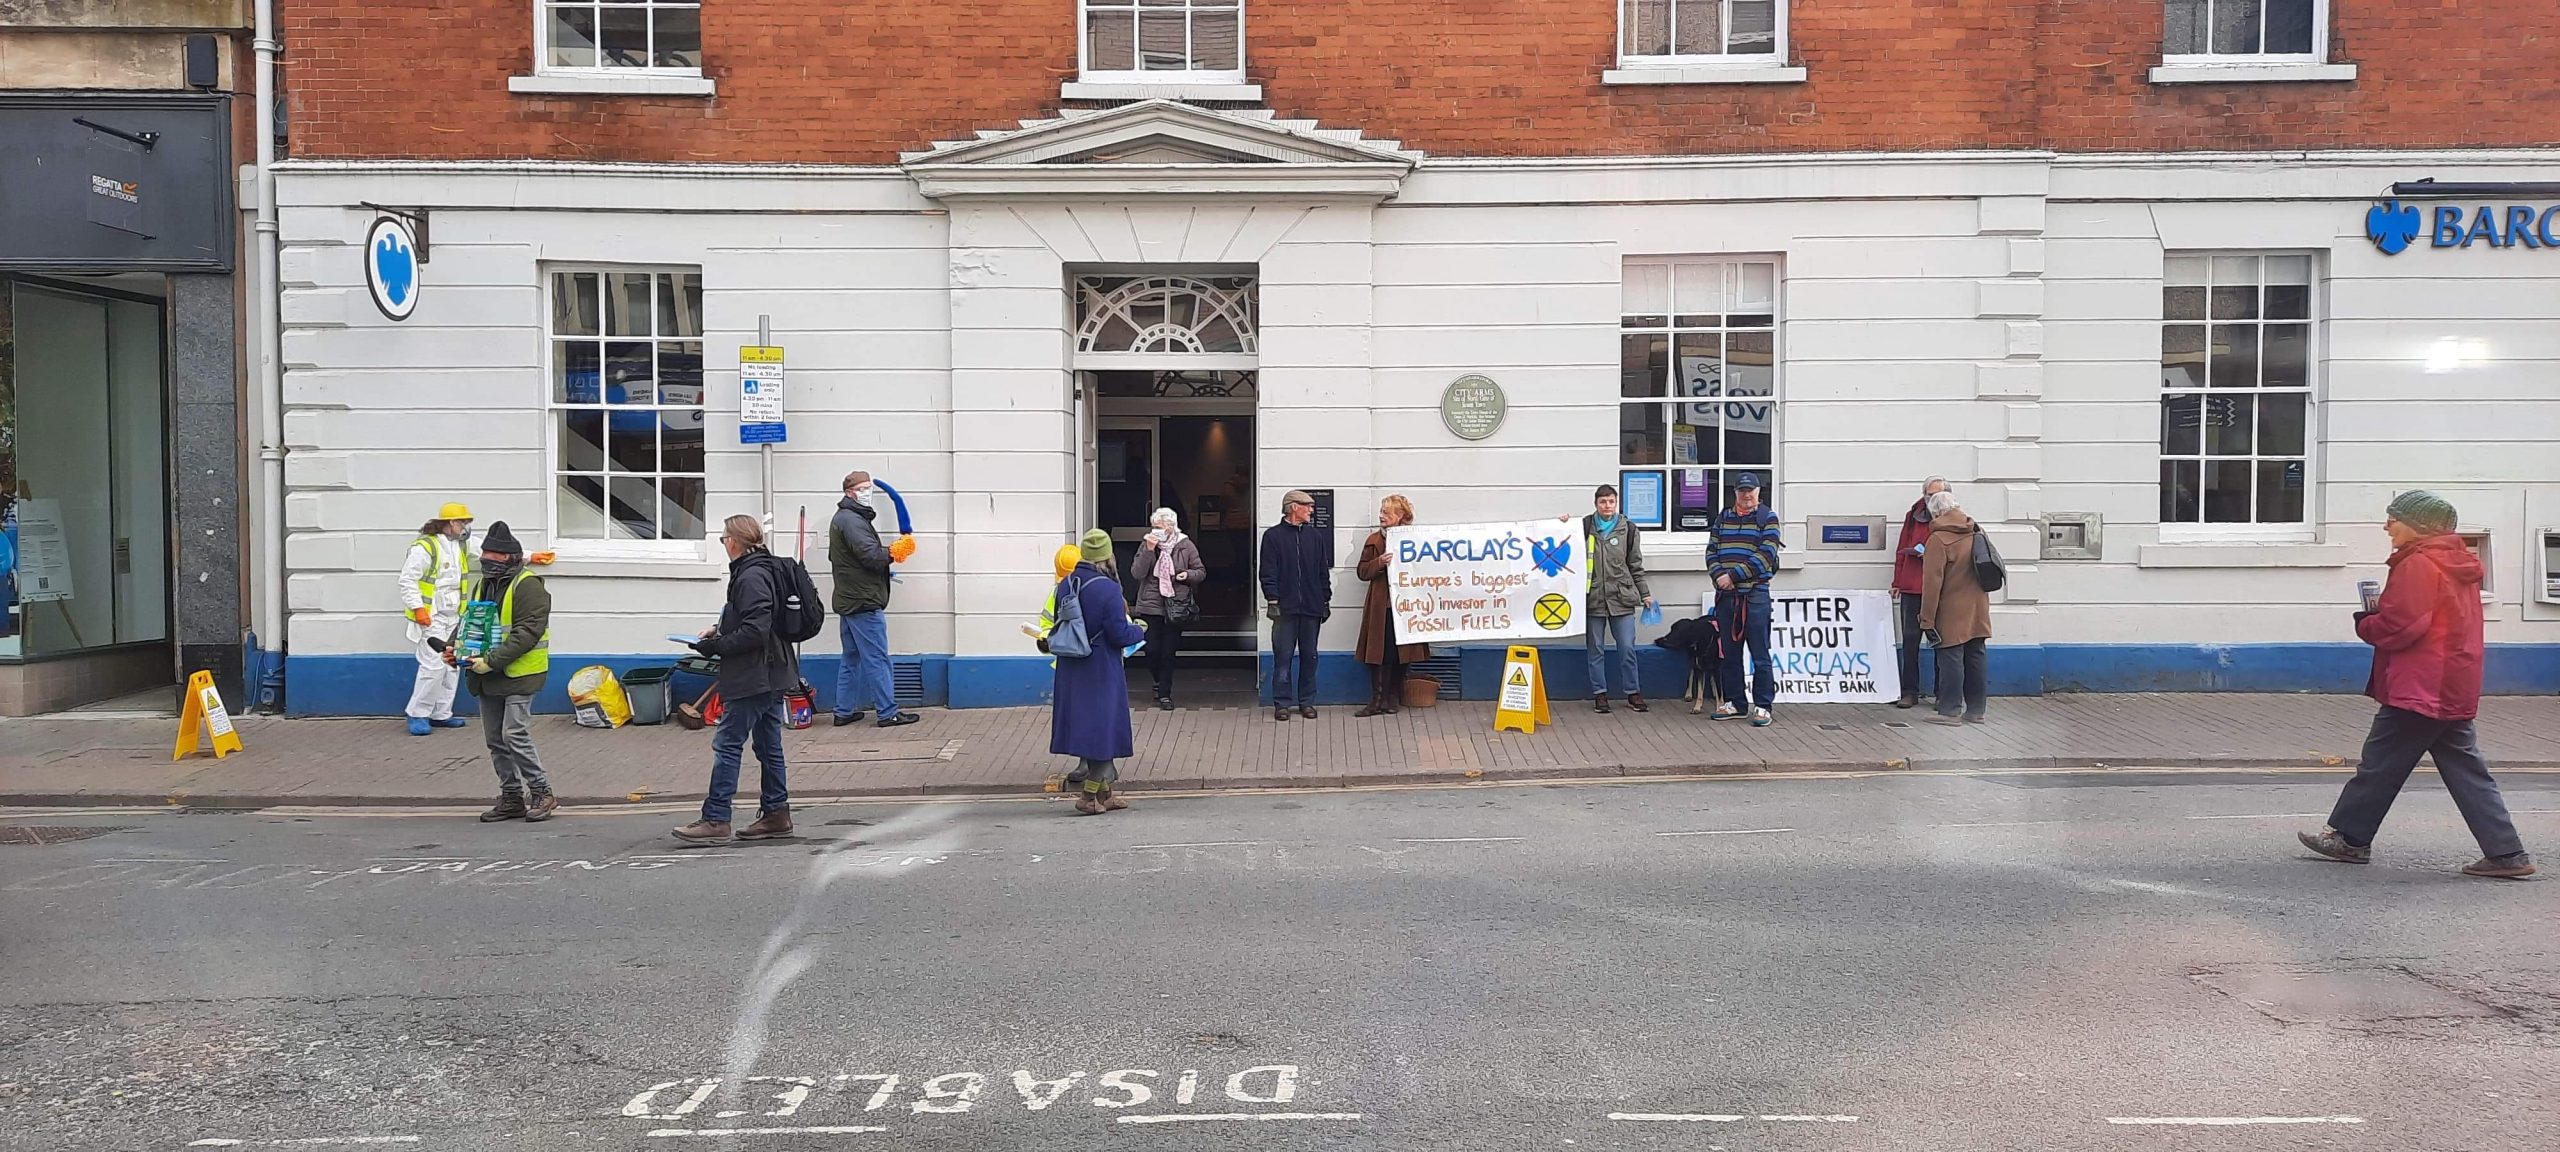 NEWS | Protest taking place outside Barclays Bank in Hereford this morning